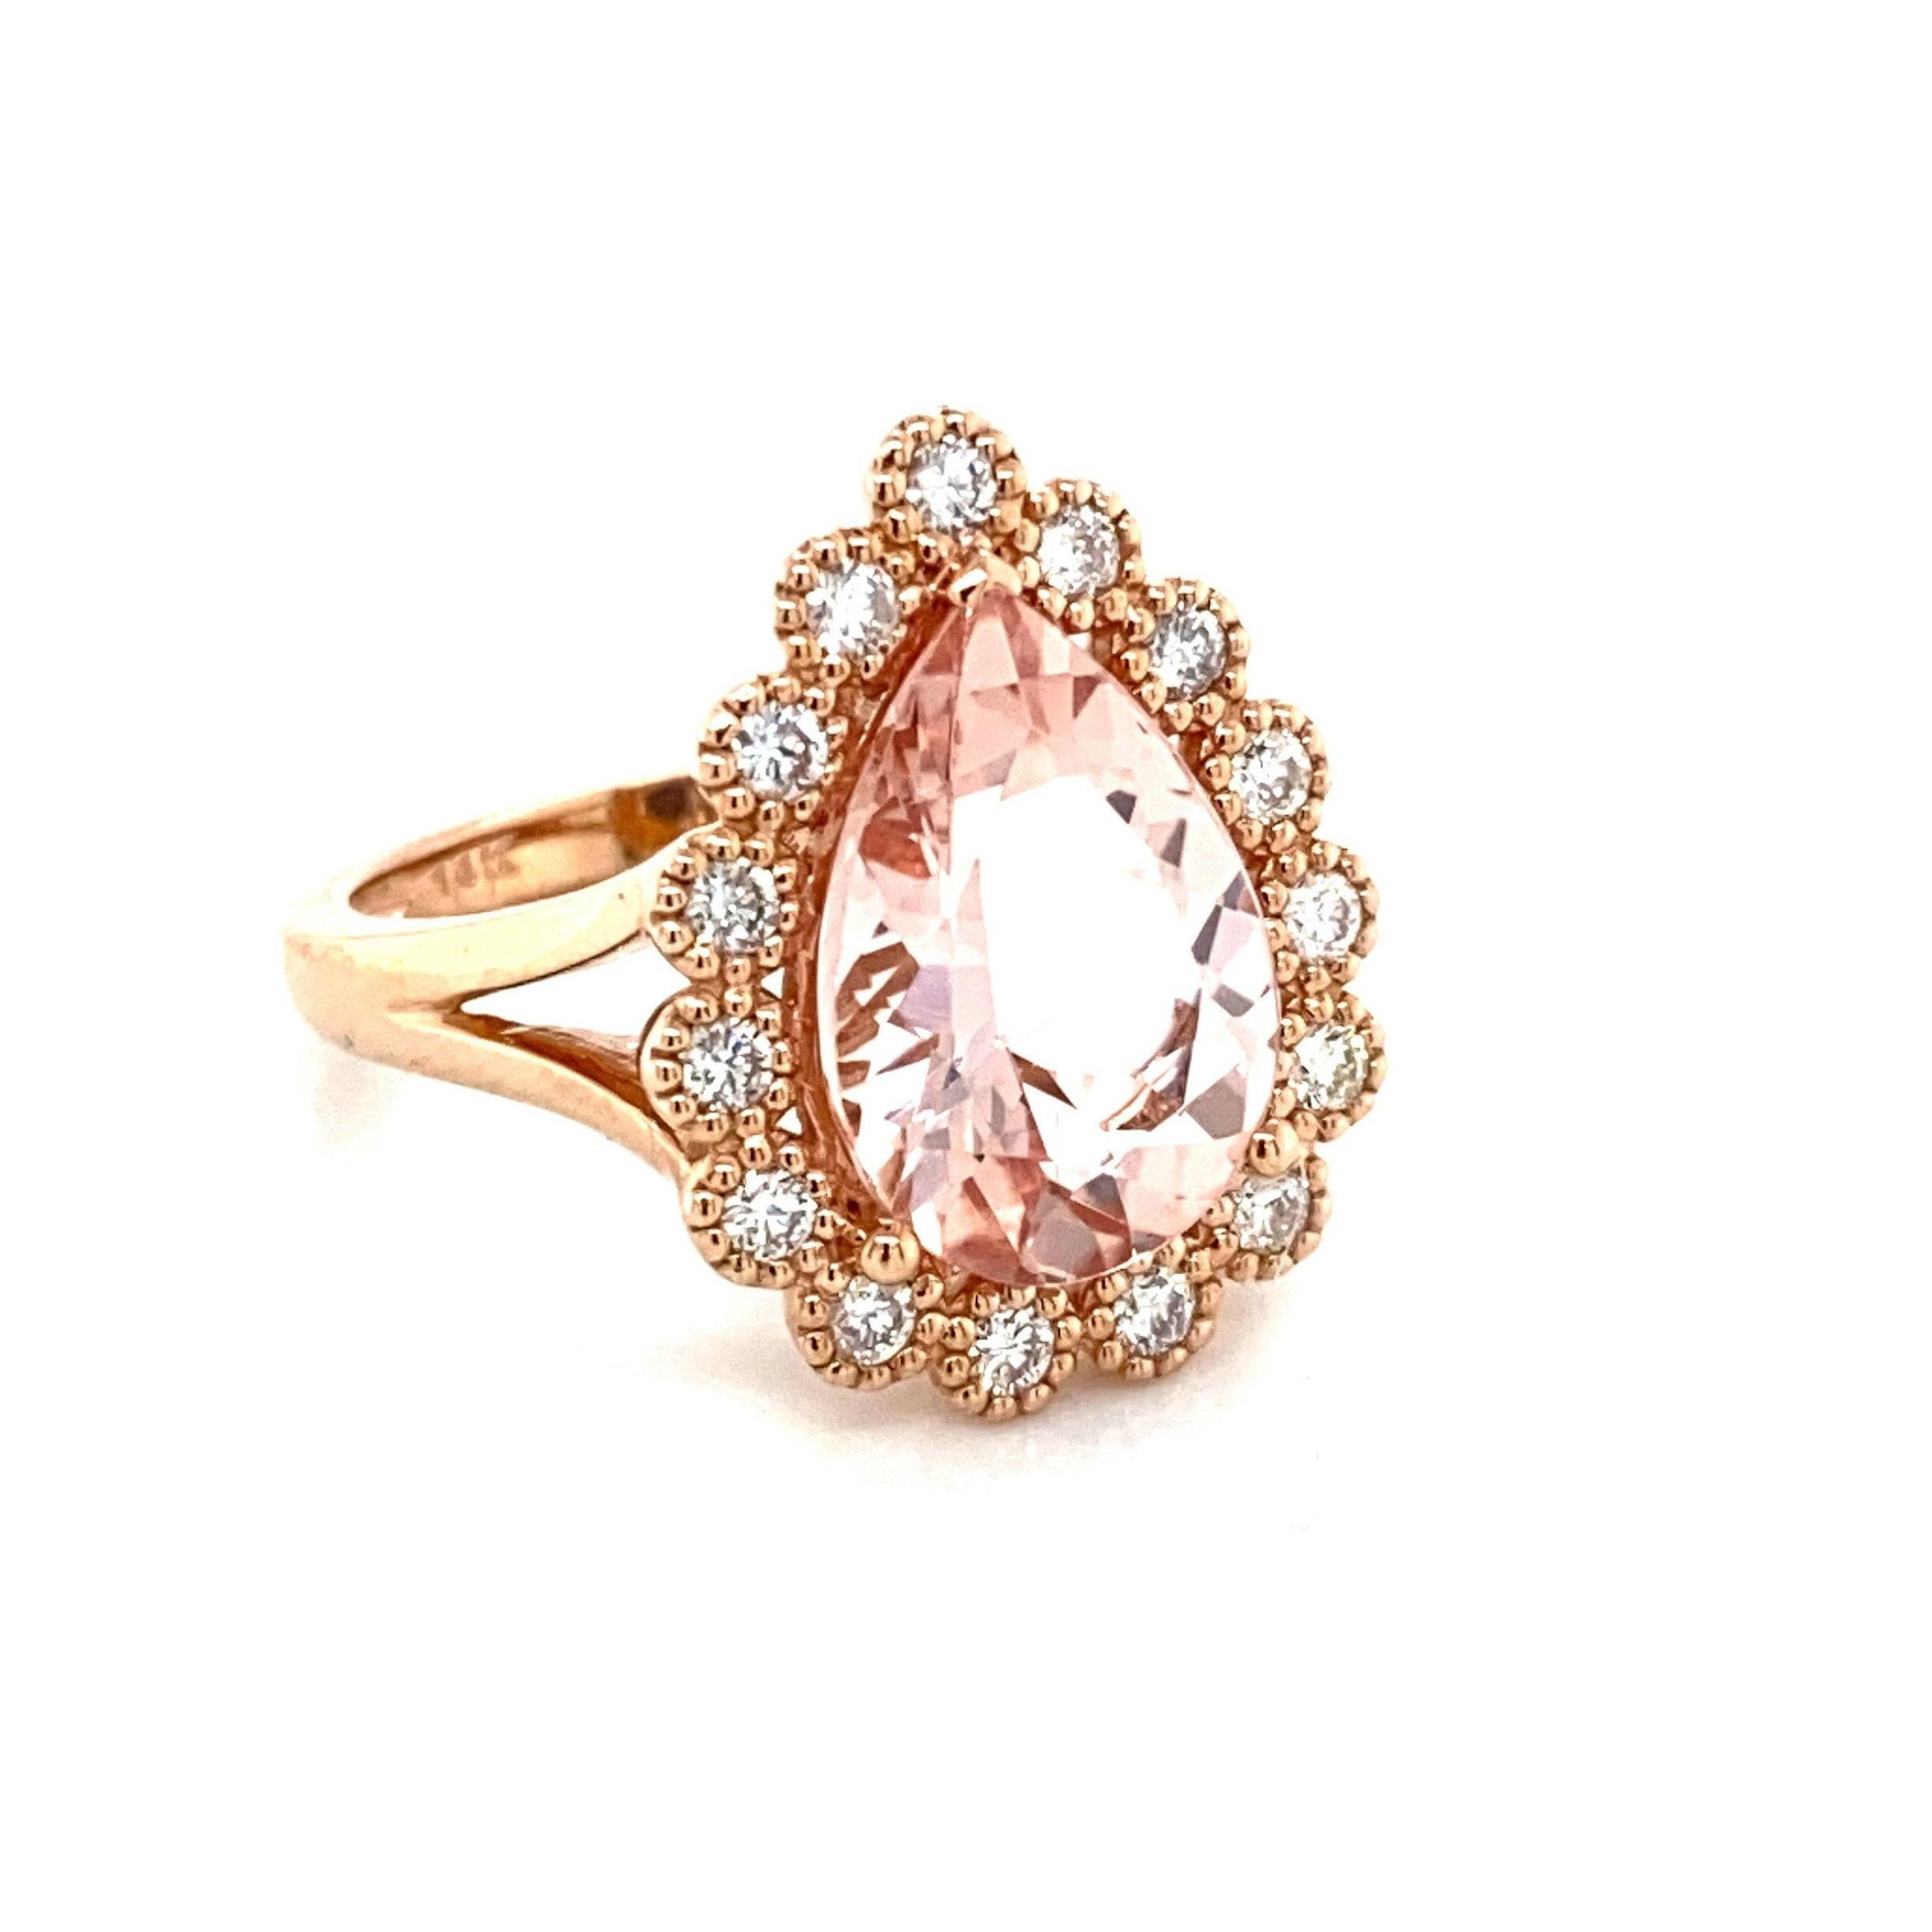 This is an exquisite pear shaped natural 3.85CT morganite and diamond ring set in solid 14K rose gold. This ring features a stunning natural 14x10MM pear cut morganite stone with excellent peachy pink color (AAA quality gem) and is surrounded by a